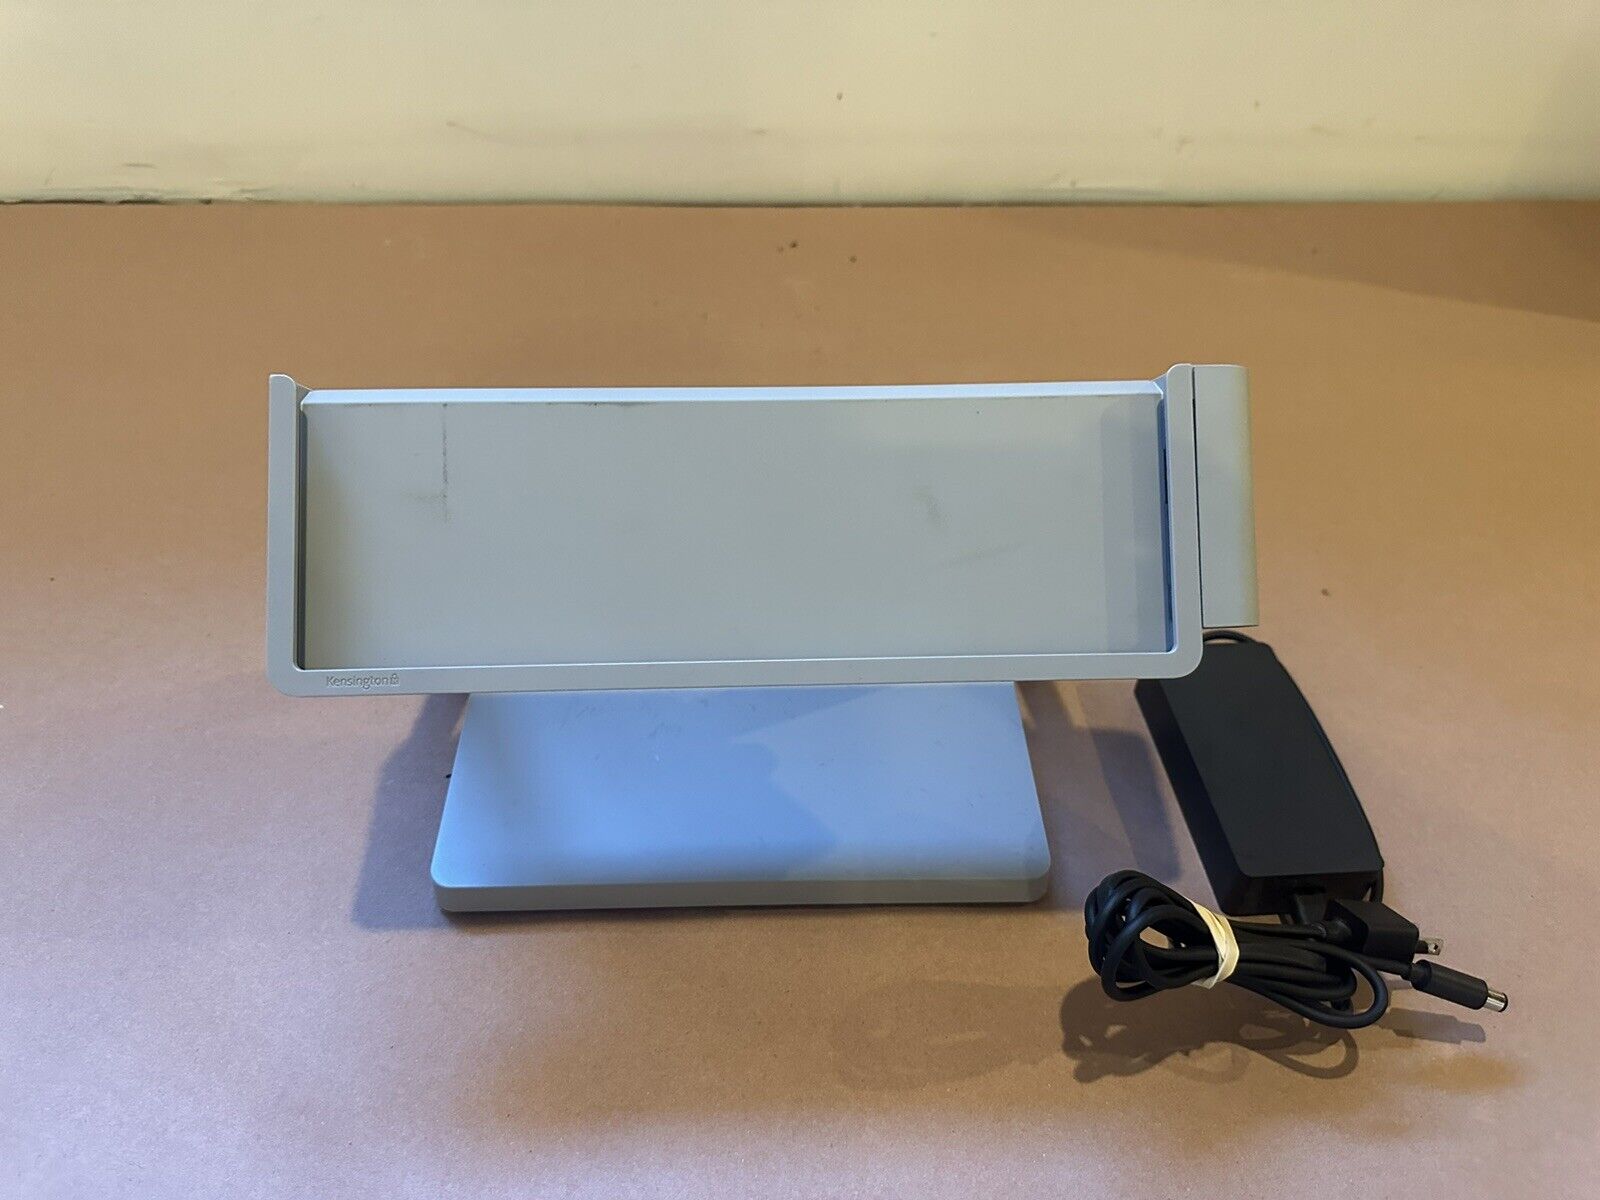 Kensington SD7000 Microsoft Surface Pro Docking Station and AC Adapter